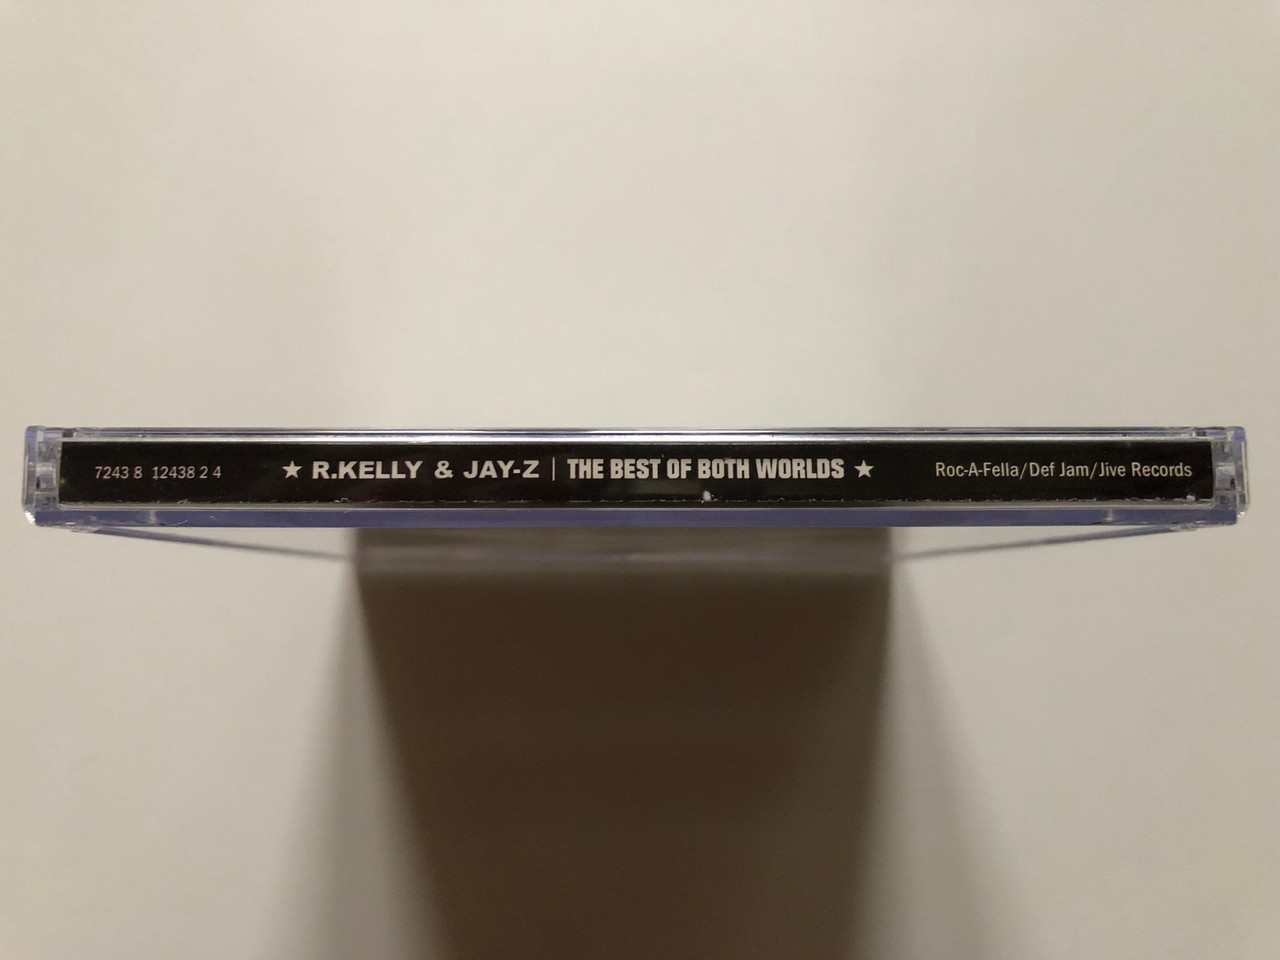 https://cdn10.bigcommerce.com/s-62bdpkt7pb/products/0/images/312900/R._Kelly_Jay-Z_The_Best_Of_Both_Worlds_Roc-A-Fella_Records_Audio_CD_2002_724381243824_3__10684.1700212586.1280.1280.JPG?c=2